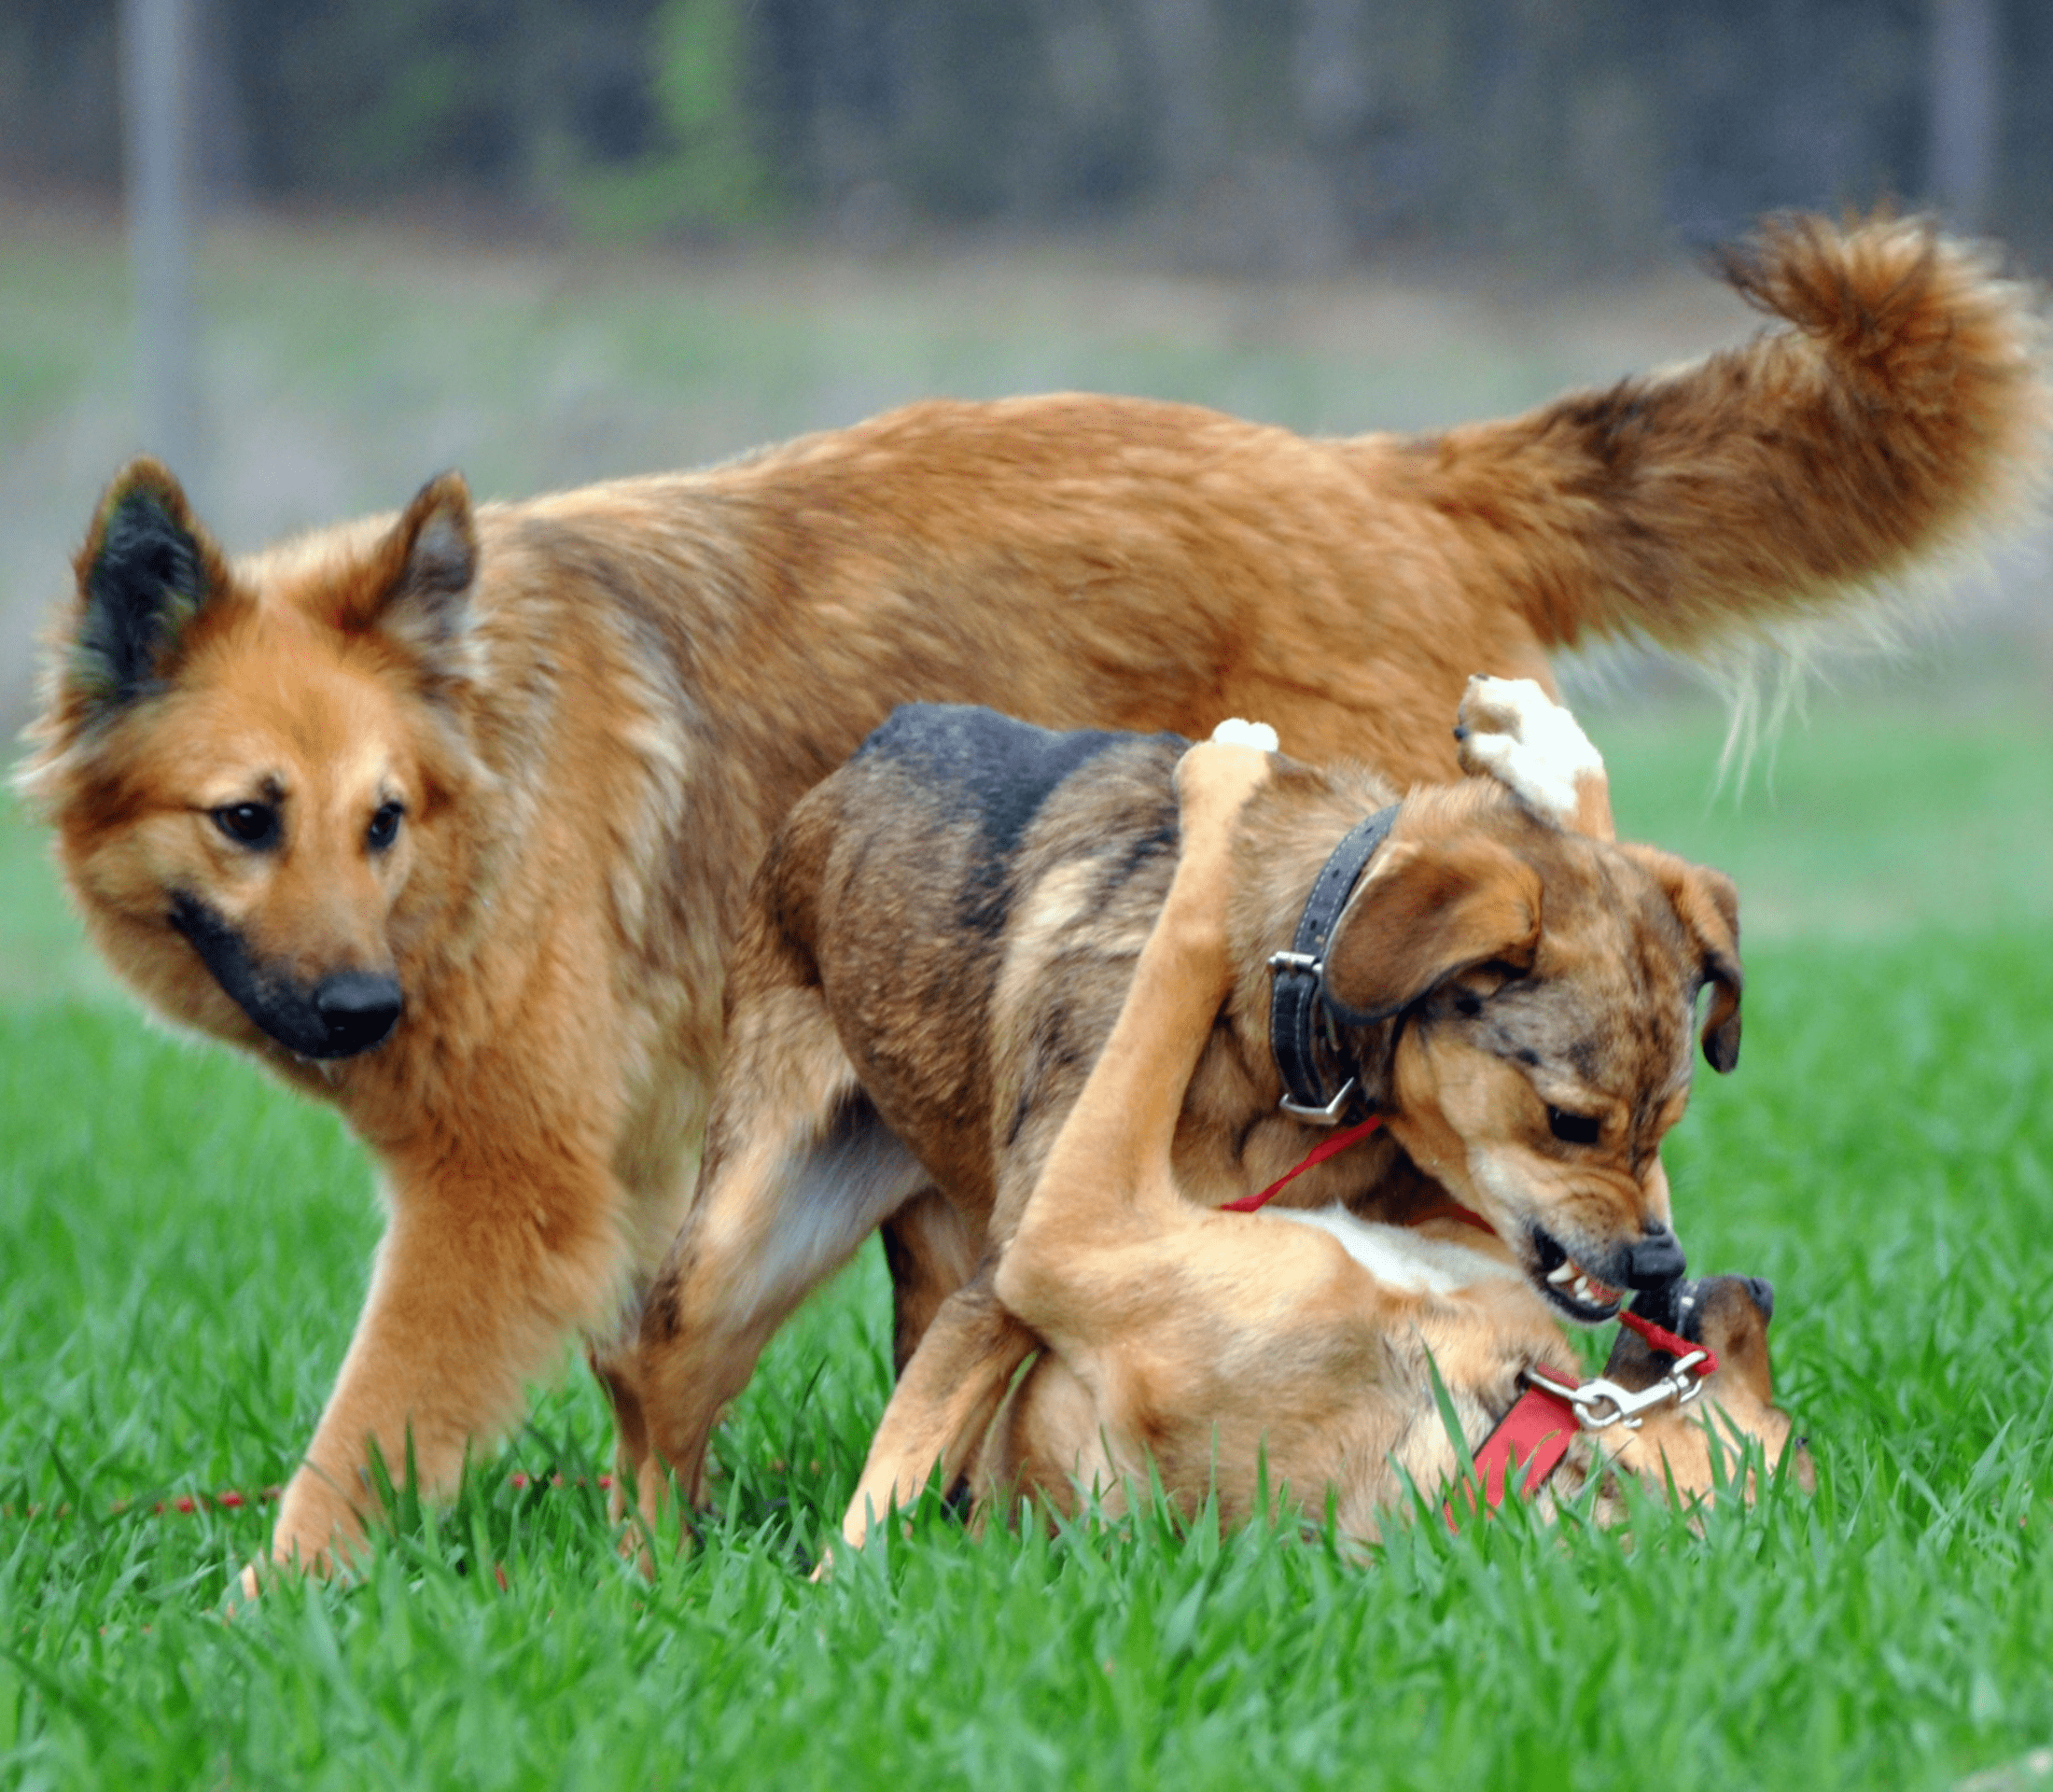 One adult K9 and two puppies playing on a field